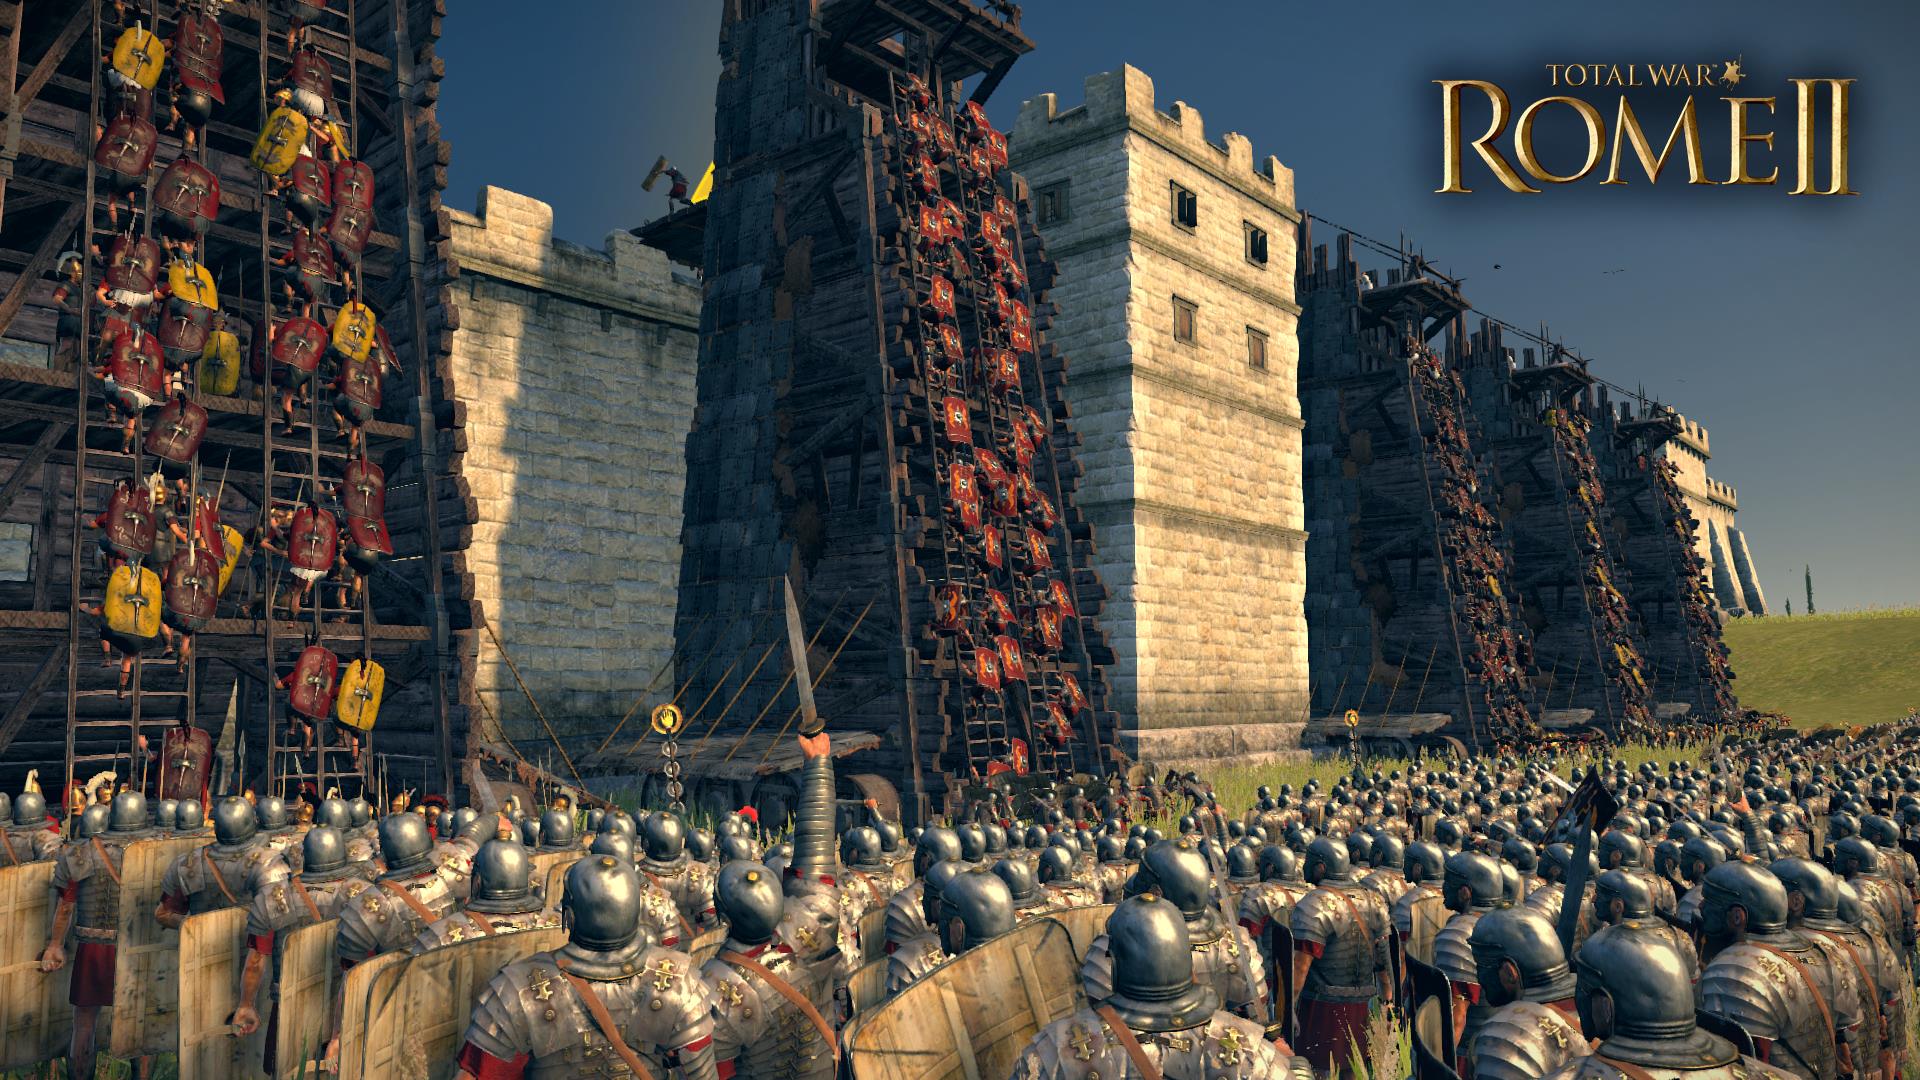 total war rome 2 crashes on startup